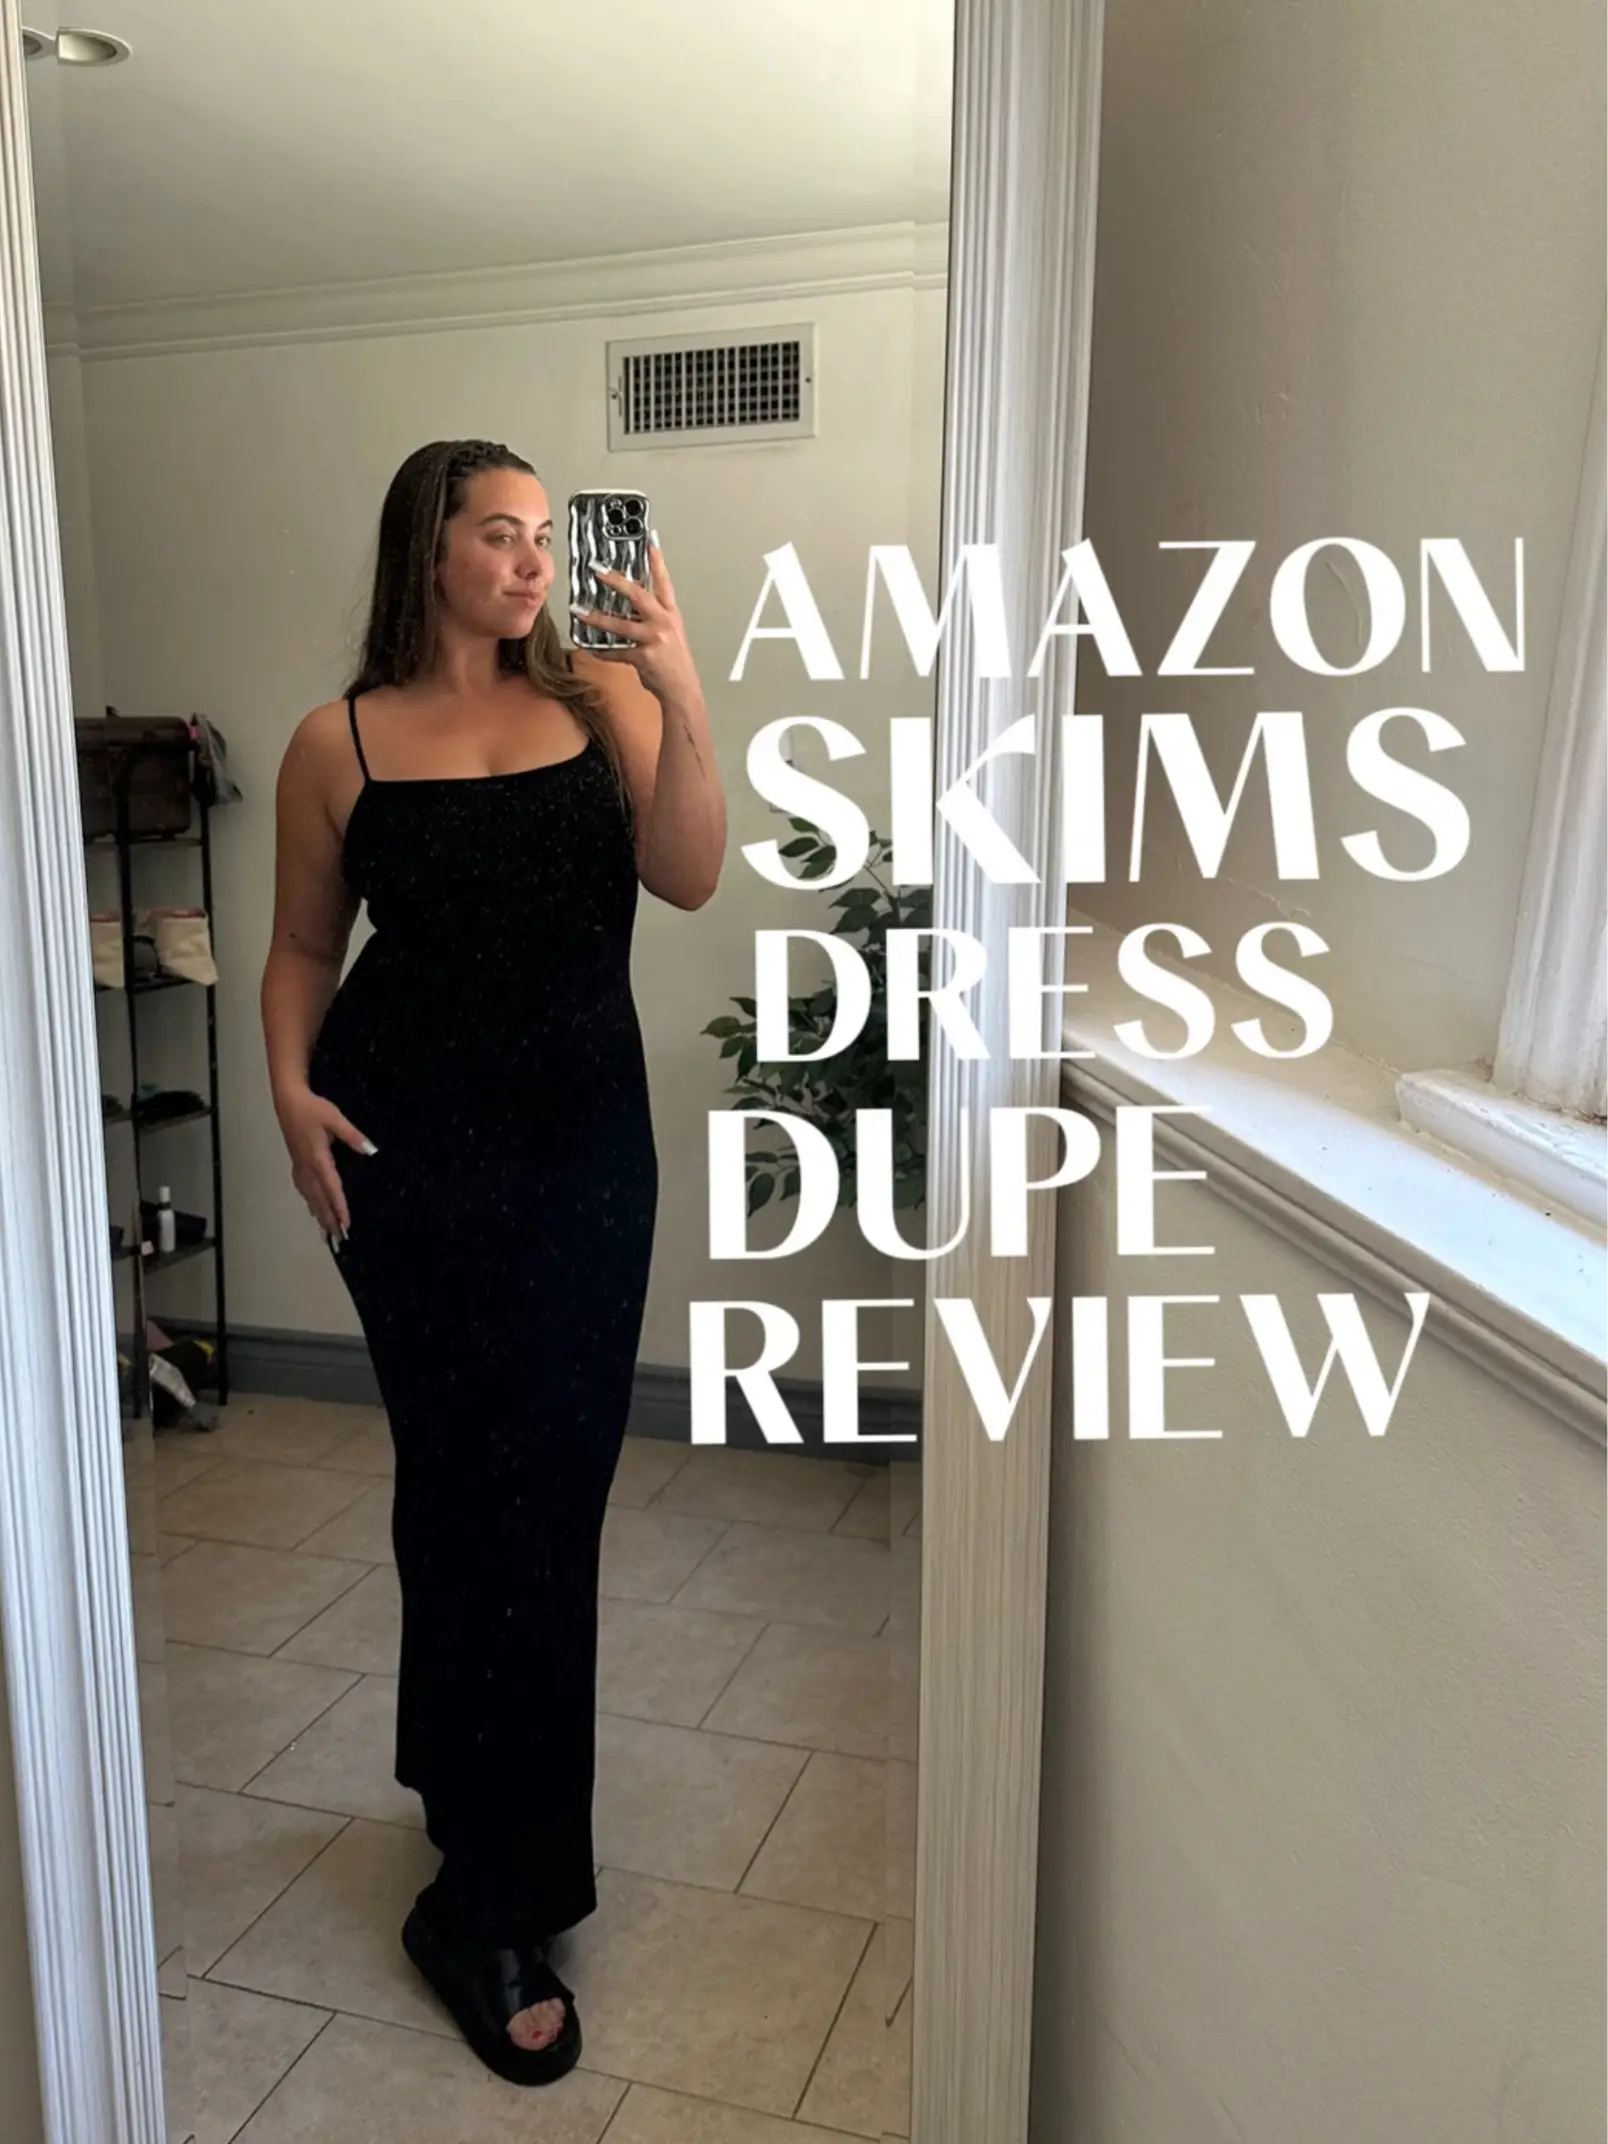 Skims Dress Dupe Review 🖤, Gallery posted by KR